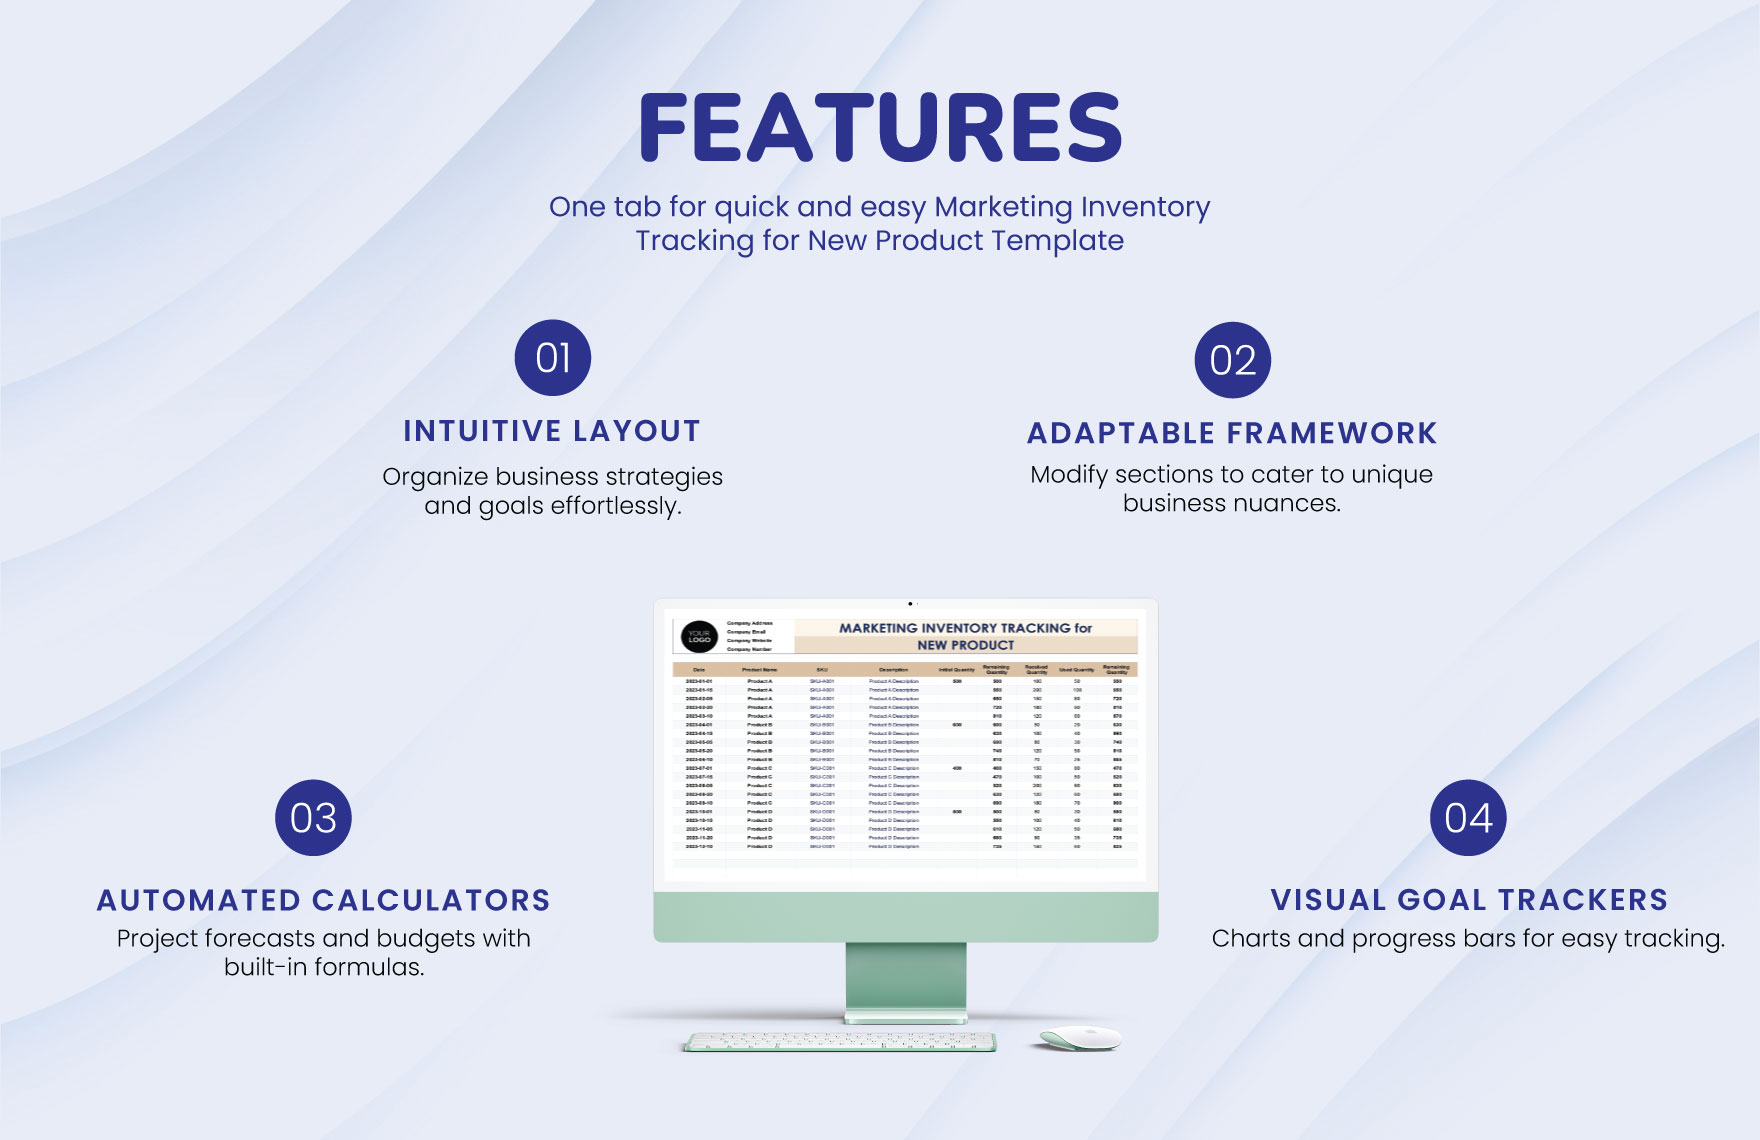 Marketing Inventory Tracking for New Product Template